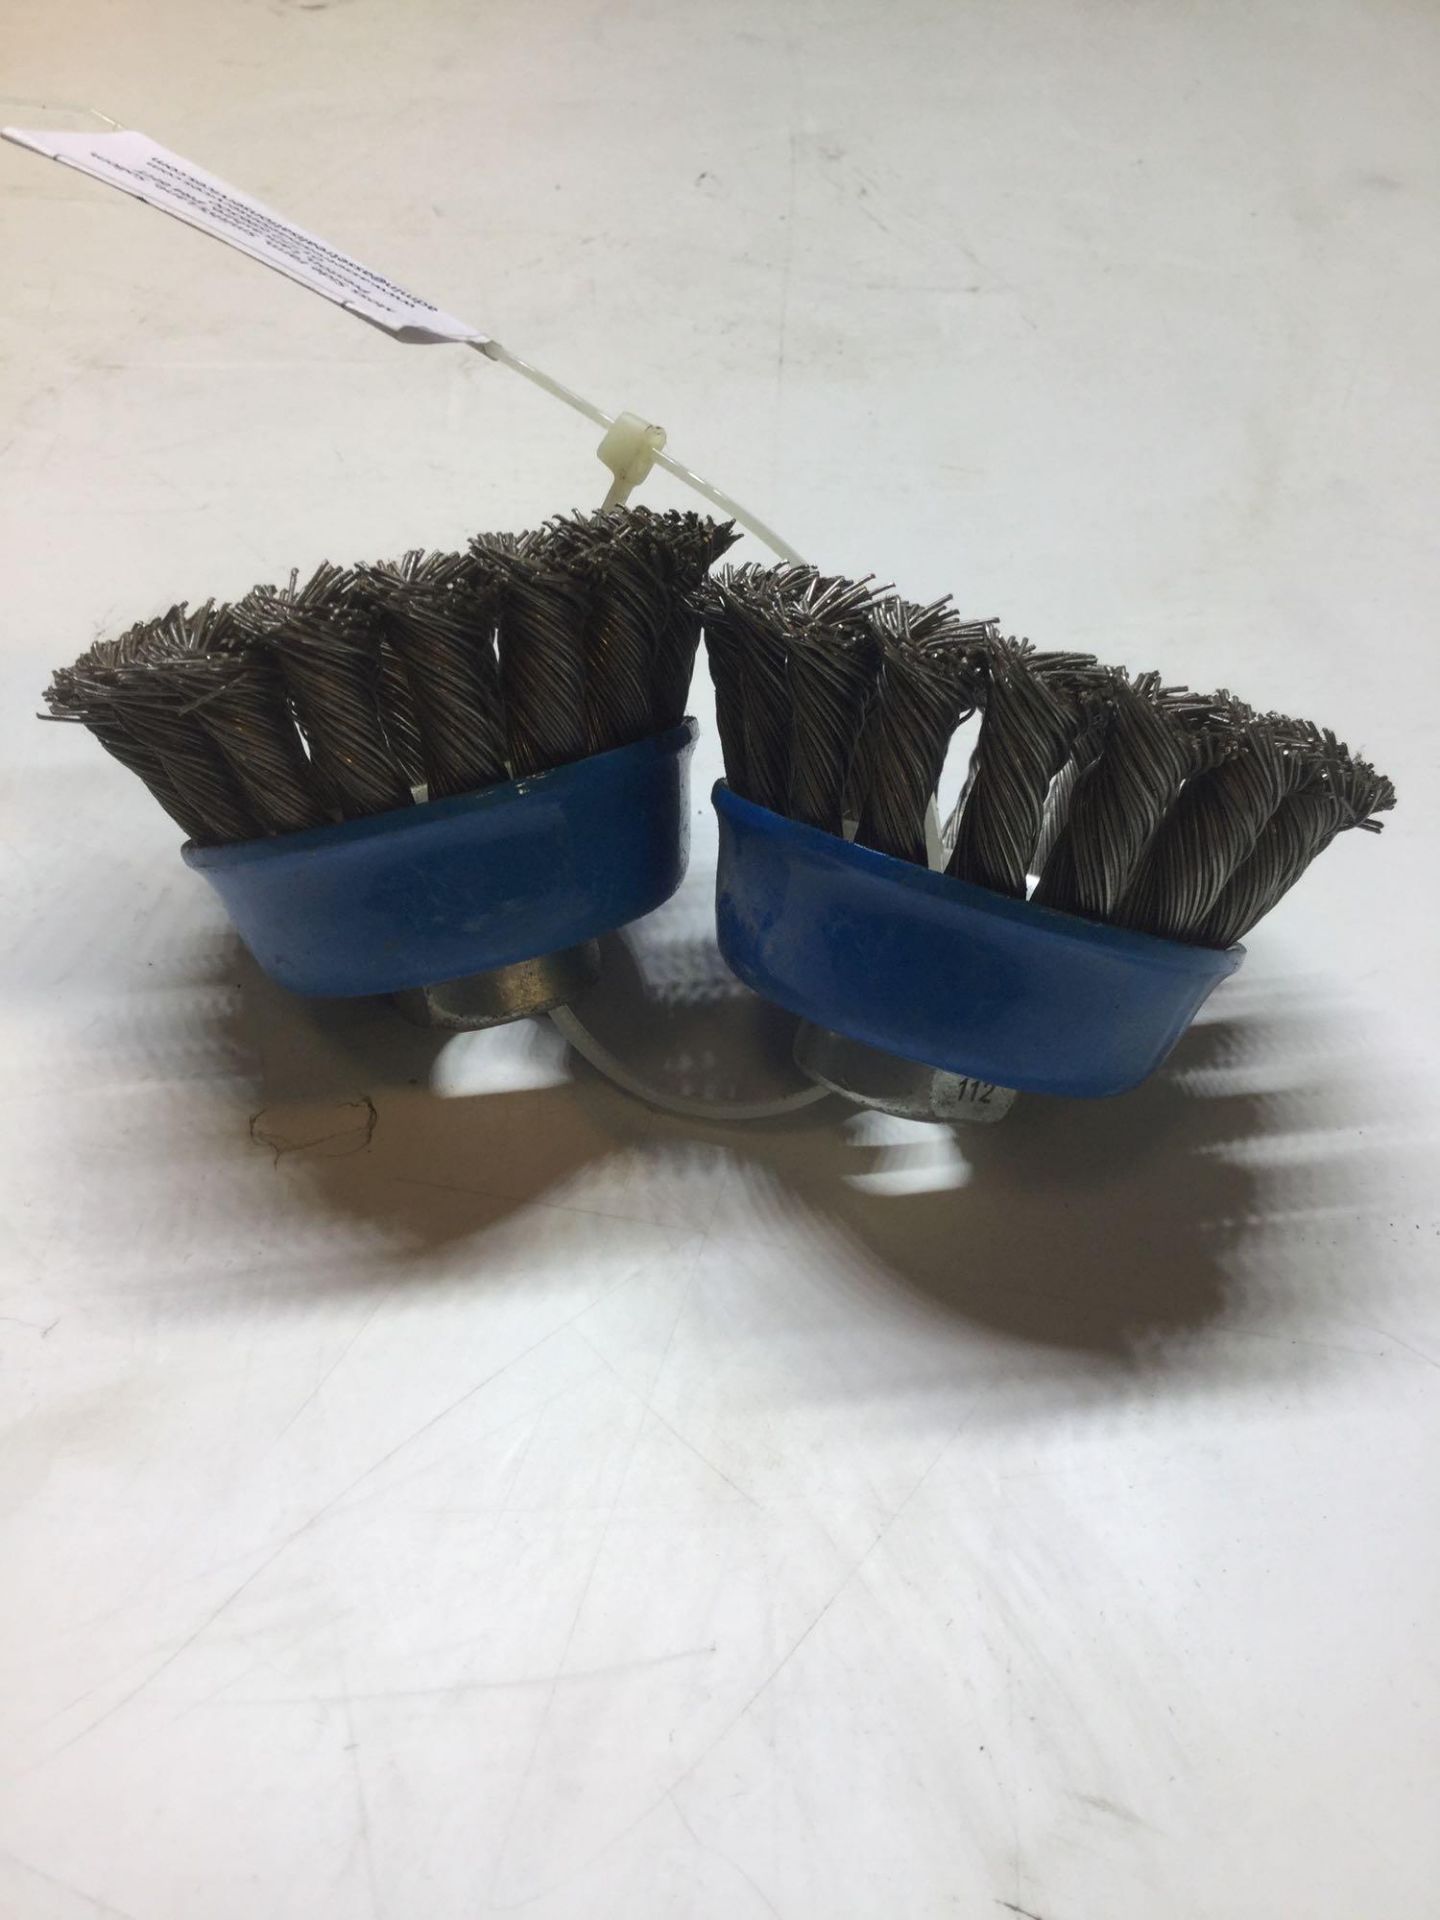 Bosch 75mm Metal Brush Wheel x2 Unboxed - Image 2 of 2